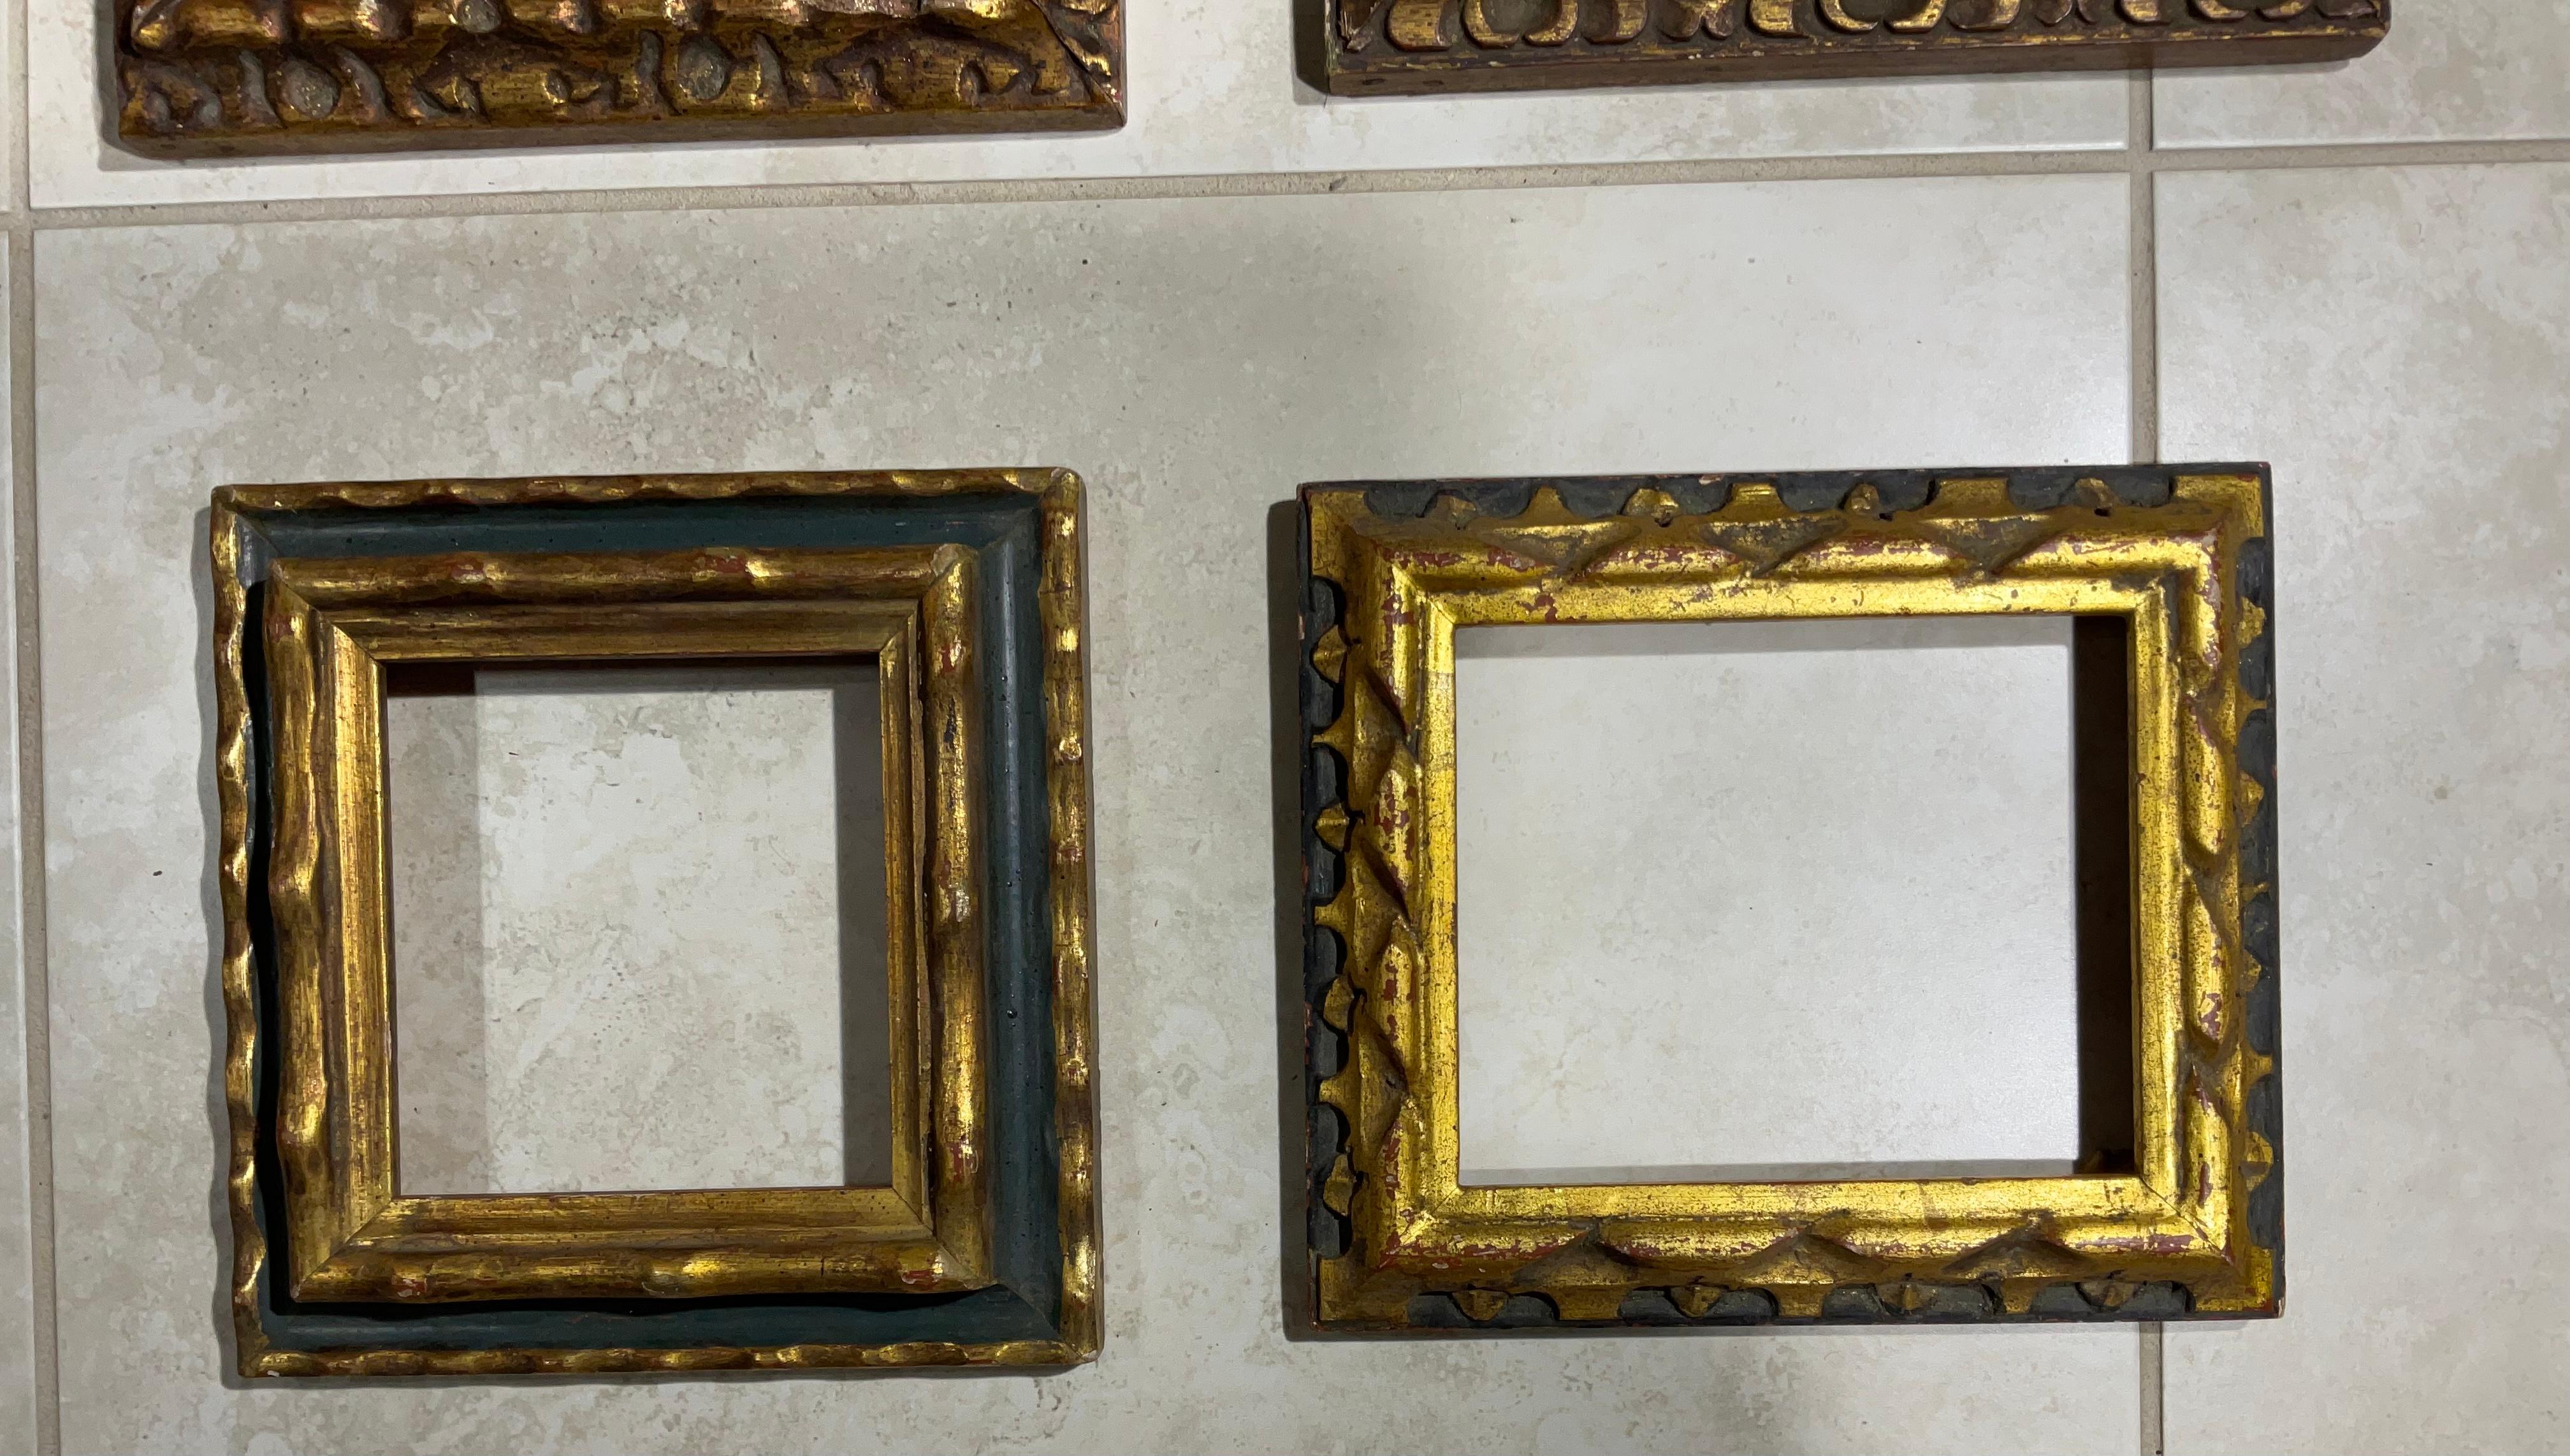 Set of six vintage frames made of solid wood ,some gold leaf with gesso.
Will sell only the full six frames.
Sizes: 8”x 8”x 1.25 9”.5 x 8”.5 x 1 9”25 x 9”.25 x 1.25
7”75 x 9”x 1
7”75 x 7”75 x1
8”.25 x 8” x 1